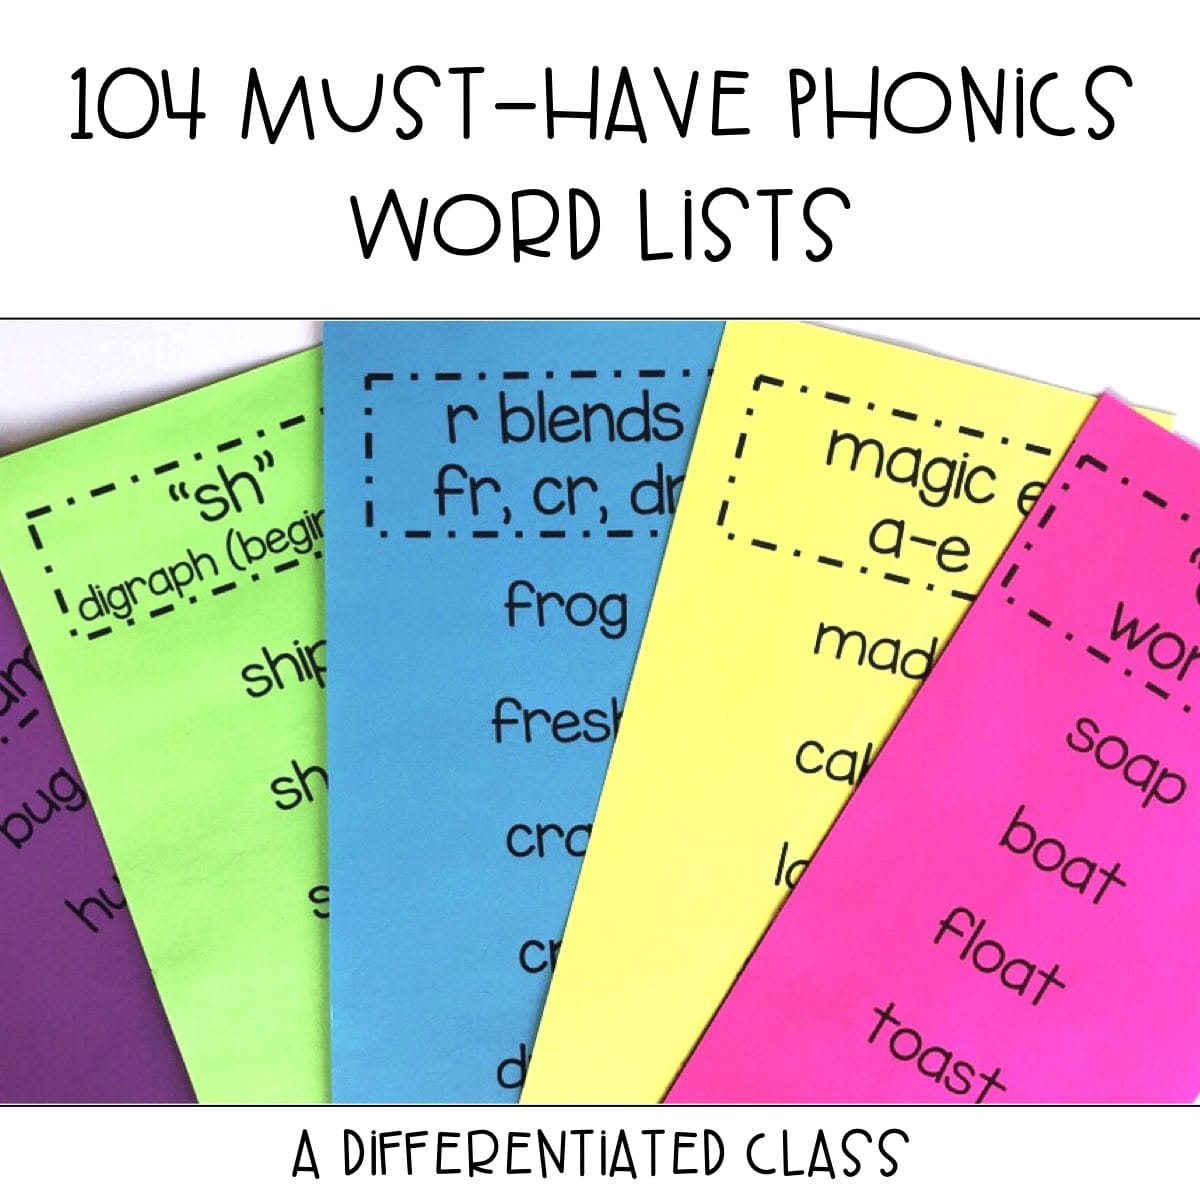 104-must-have-phonics-word-lists-a-differentiated-class